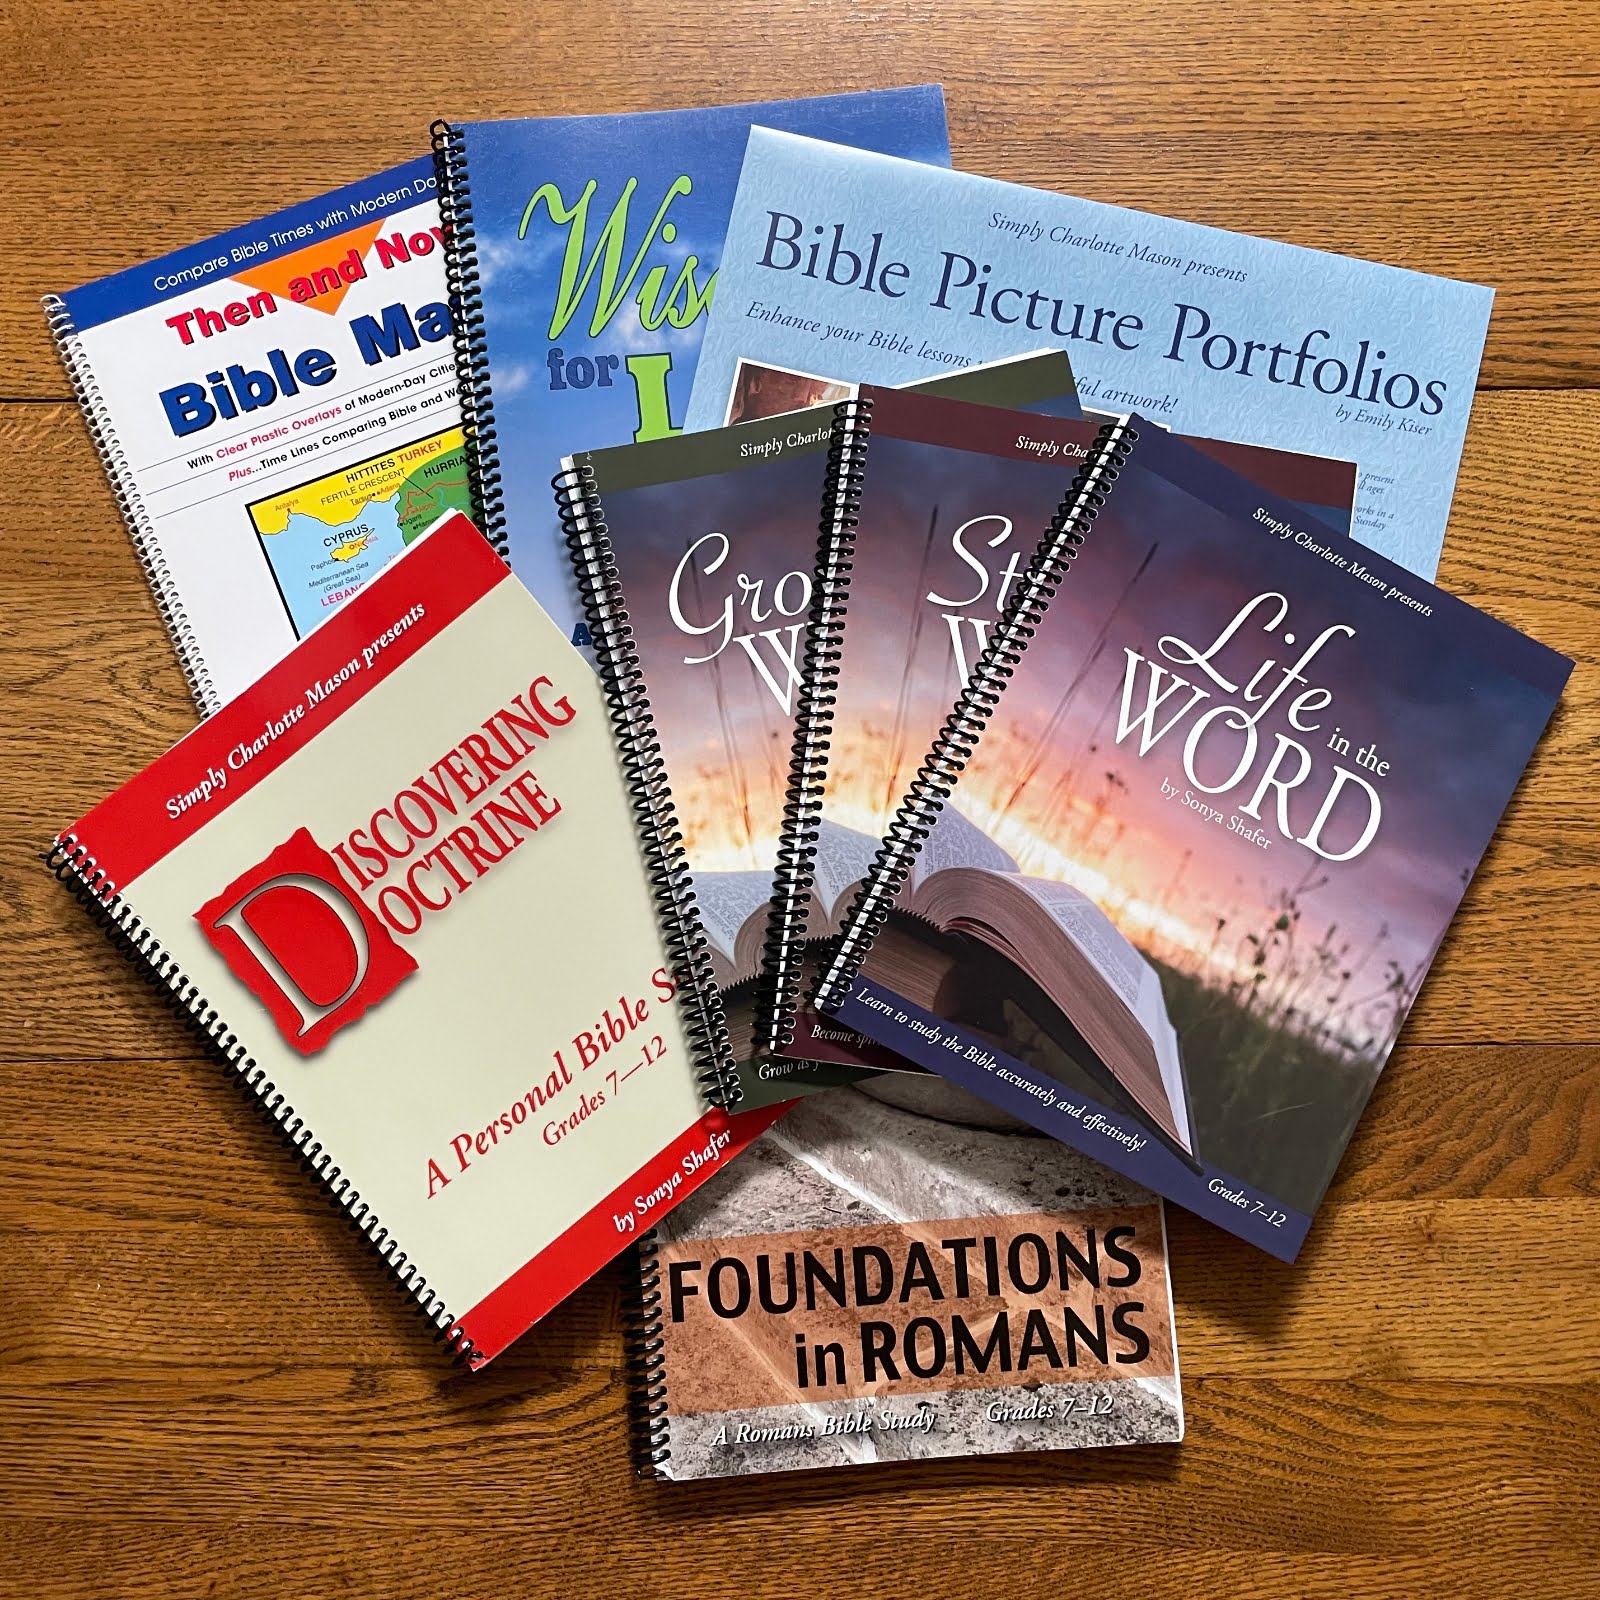 More Great Resources for Teaching Bible